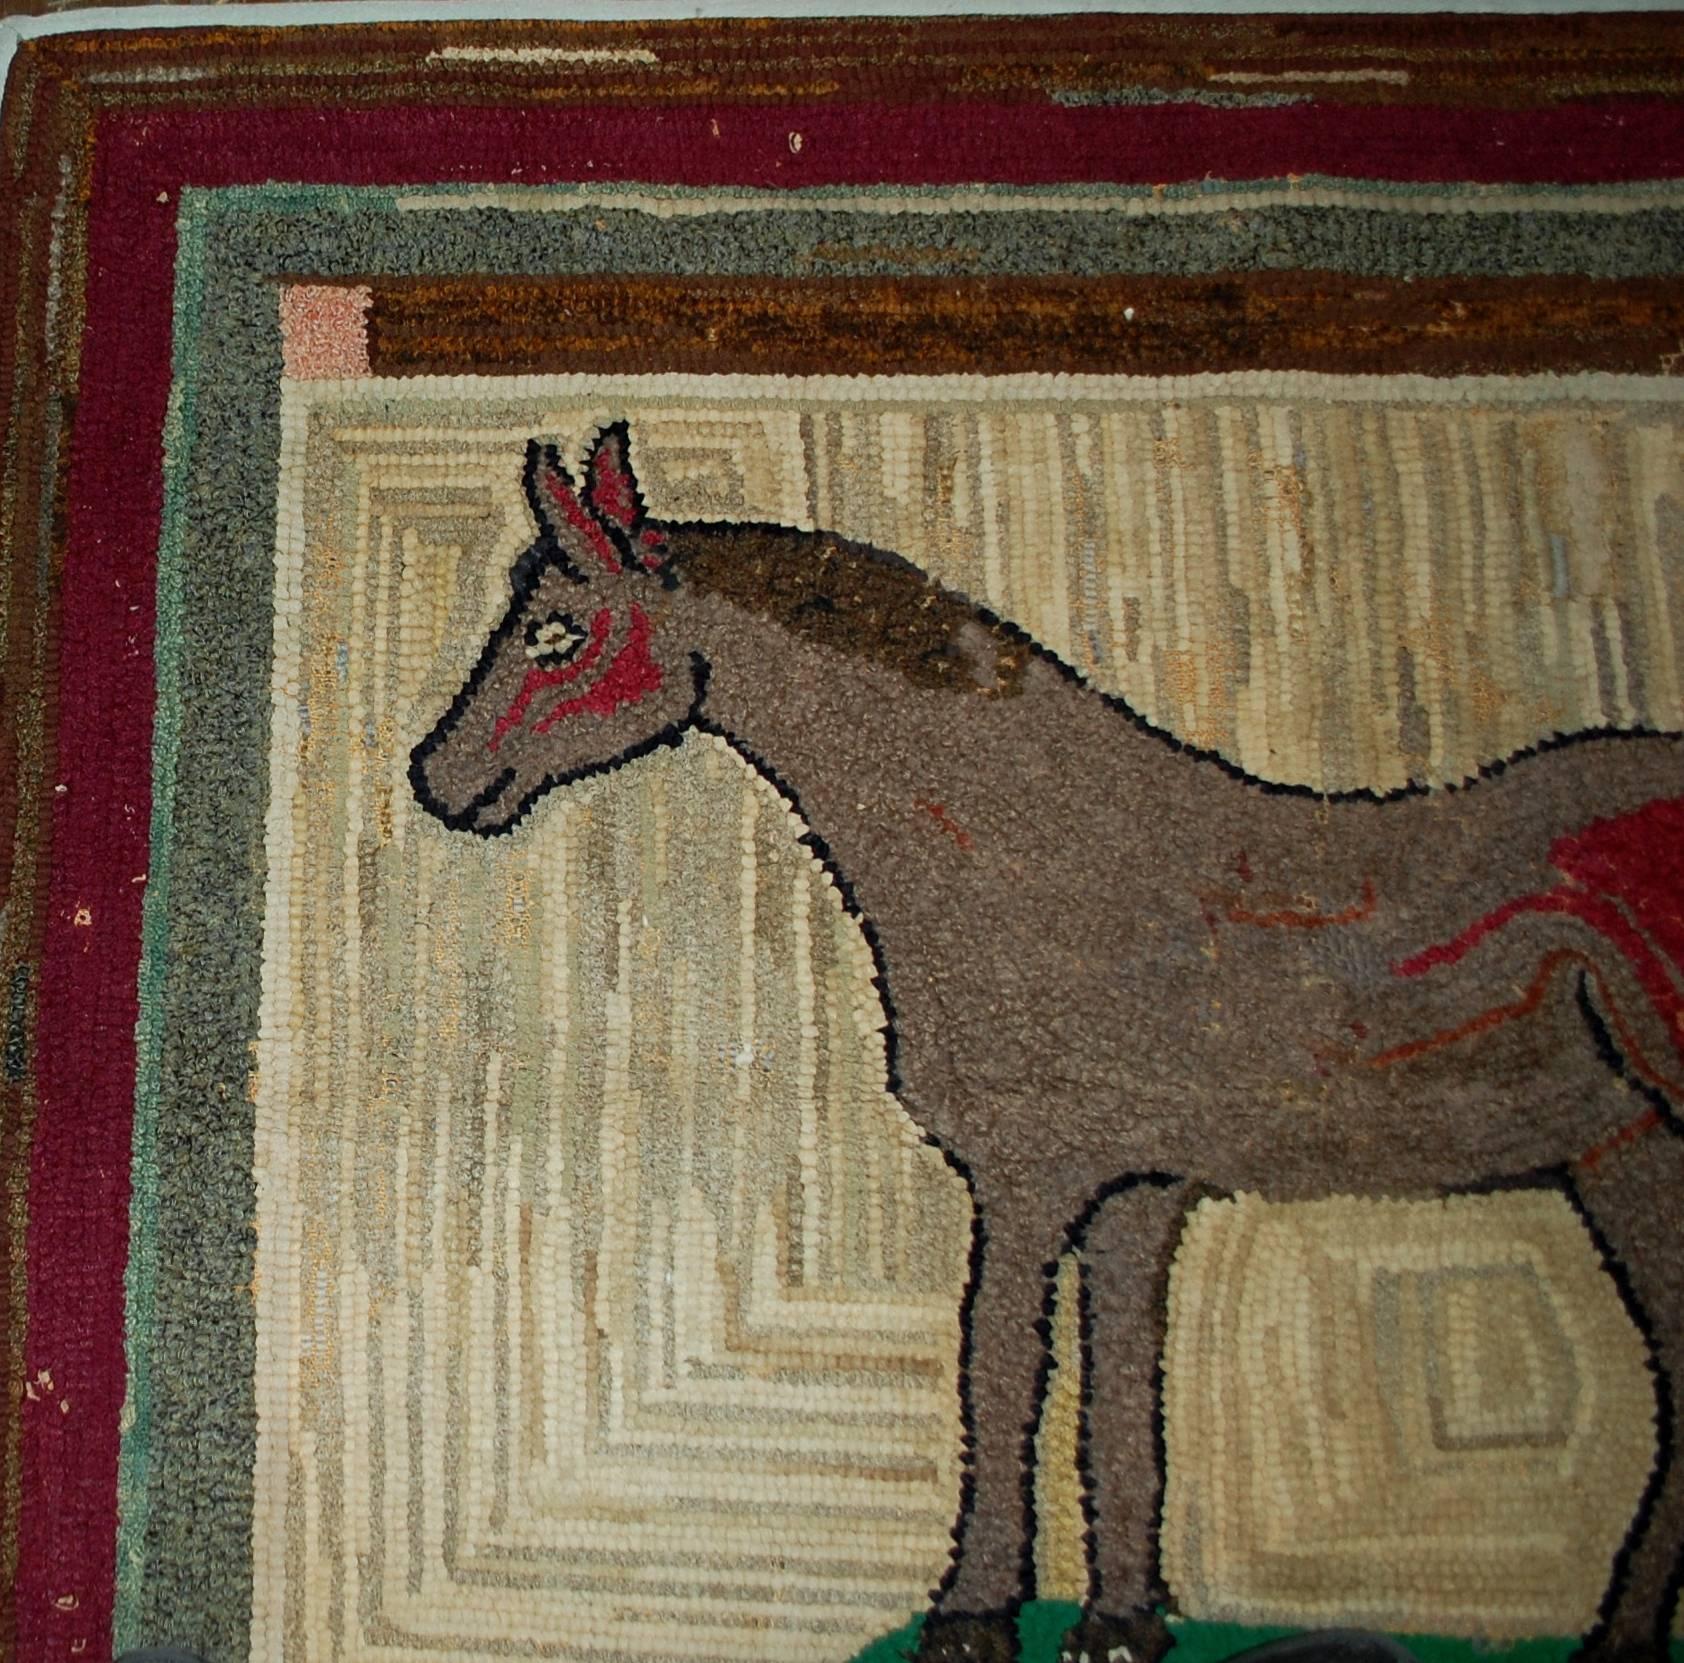 Handmade antique square American hooked rug in good condition. The rug has been made in in square shape with an image of the grey horse on the beige field. The central area surrounded by a multiply borders in burgundy, grey and brown shades. The rug